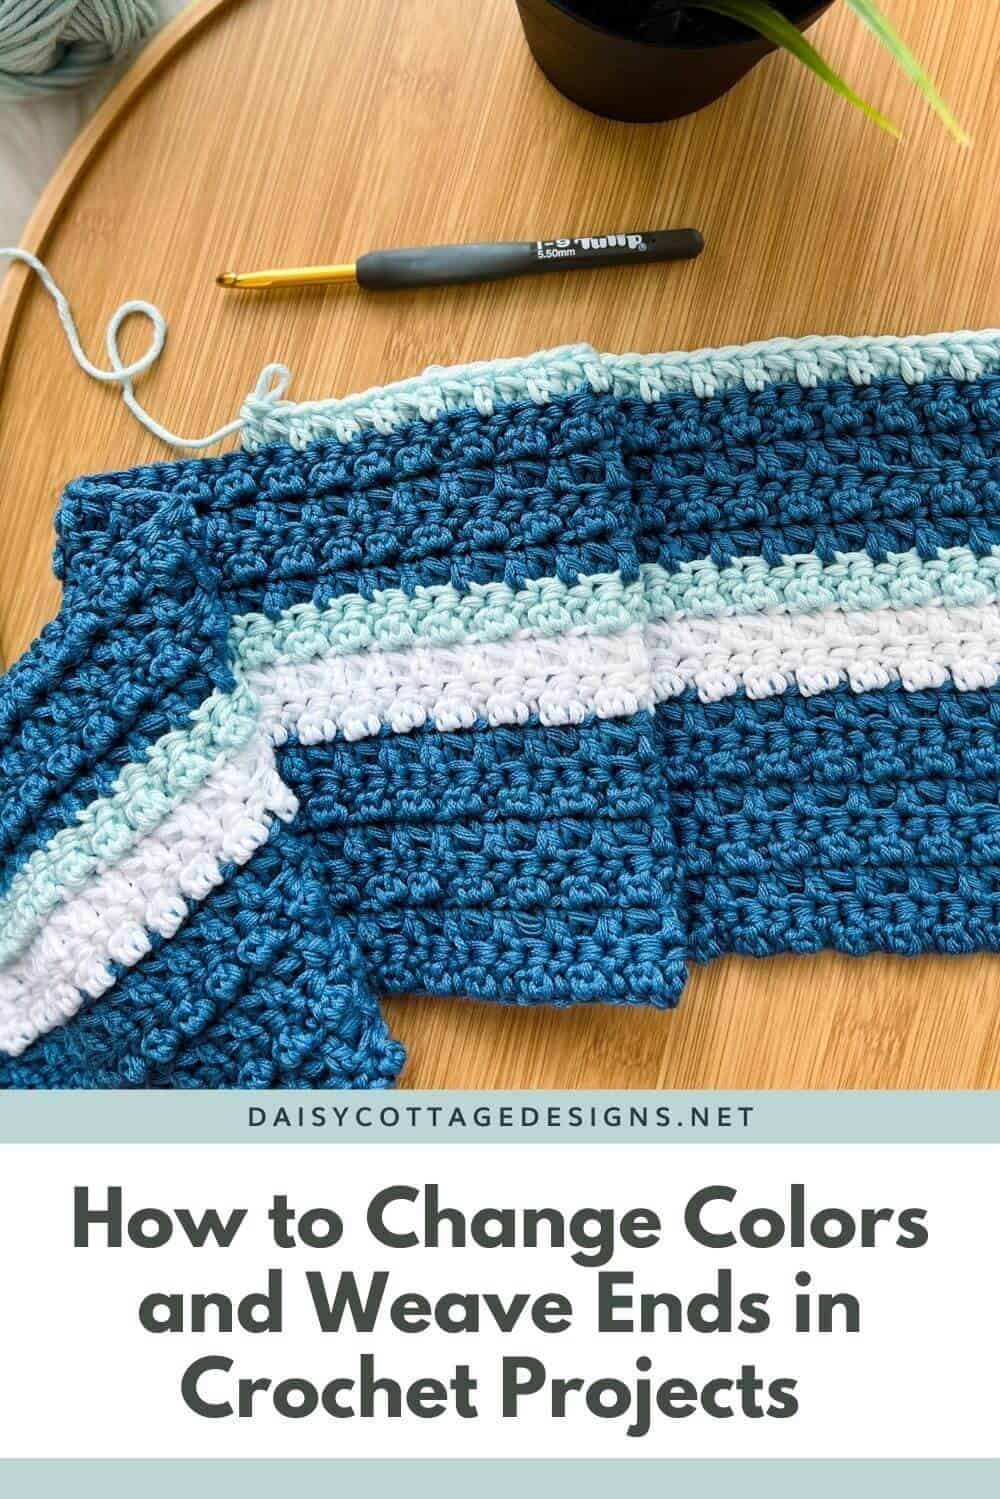 Learn how to change colors and weave ends in your crochet projects